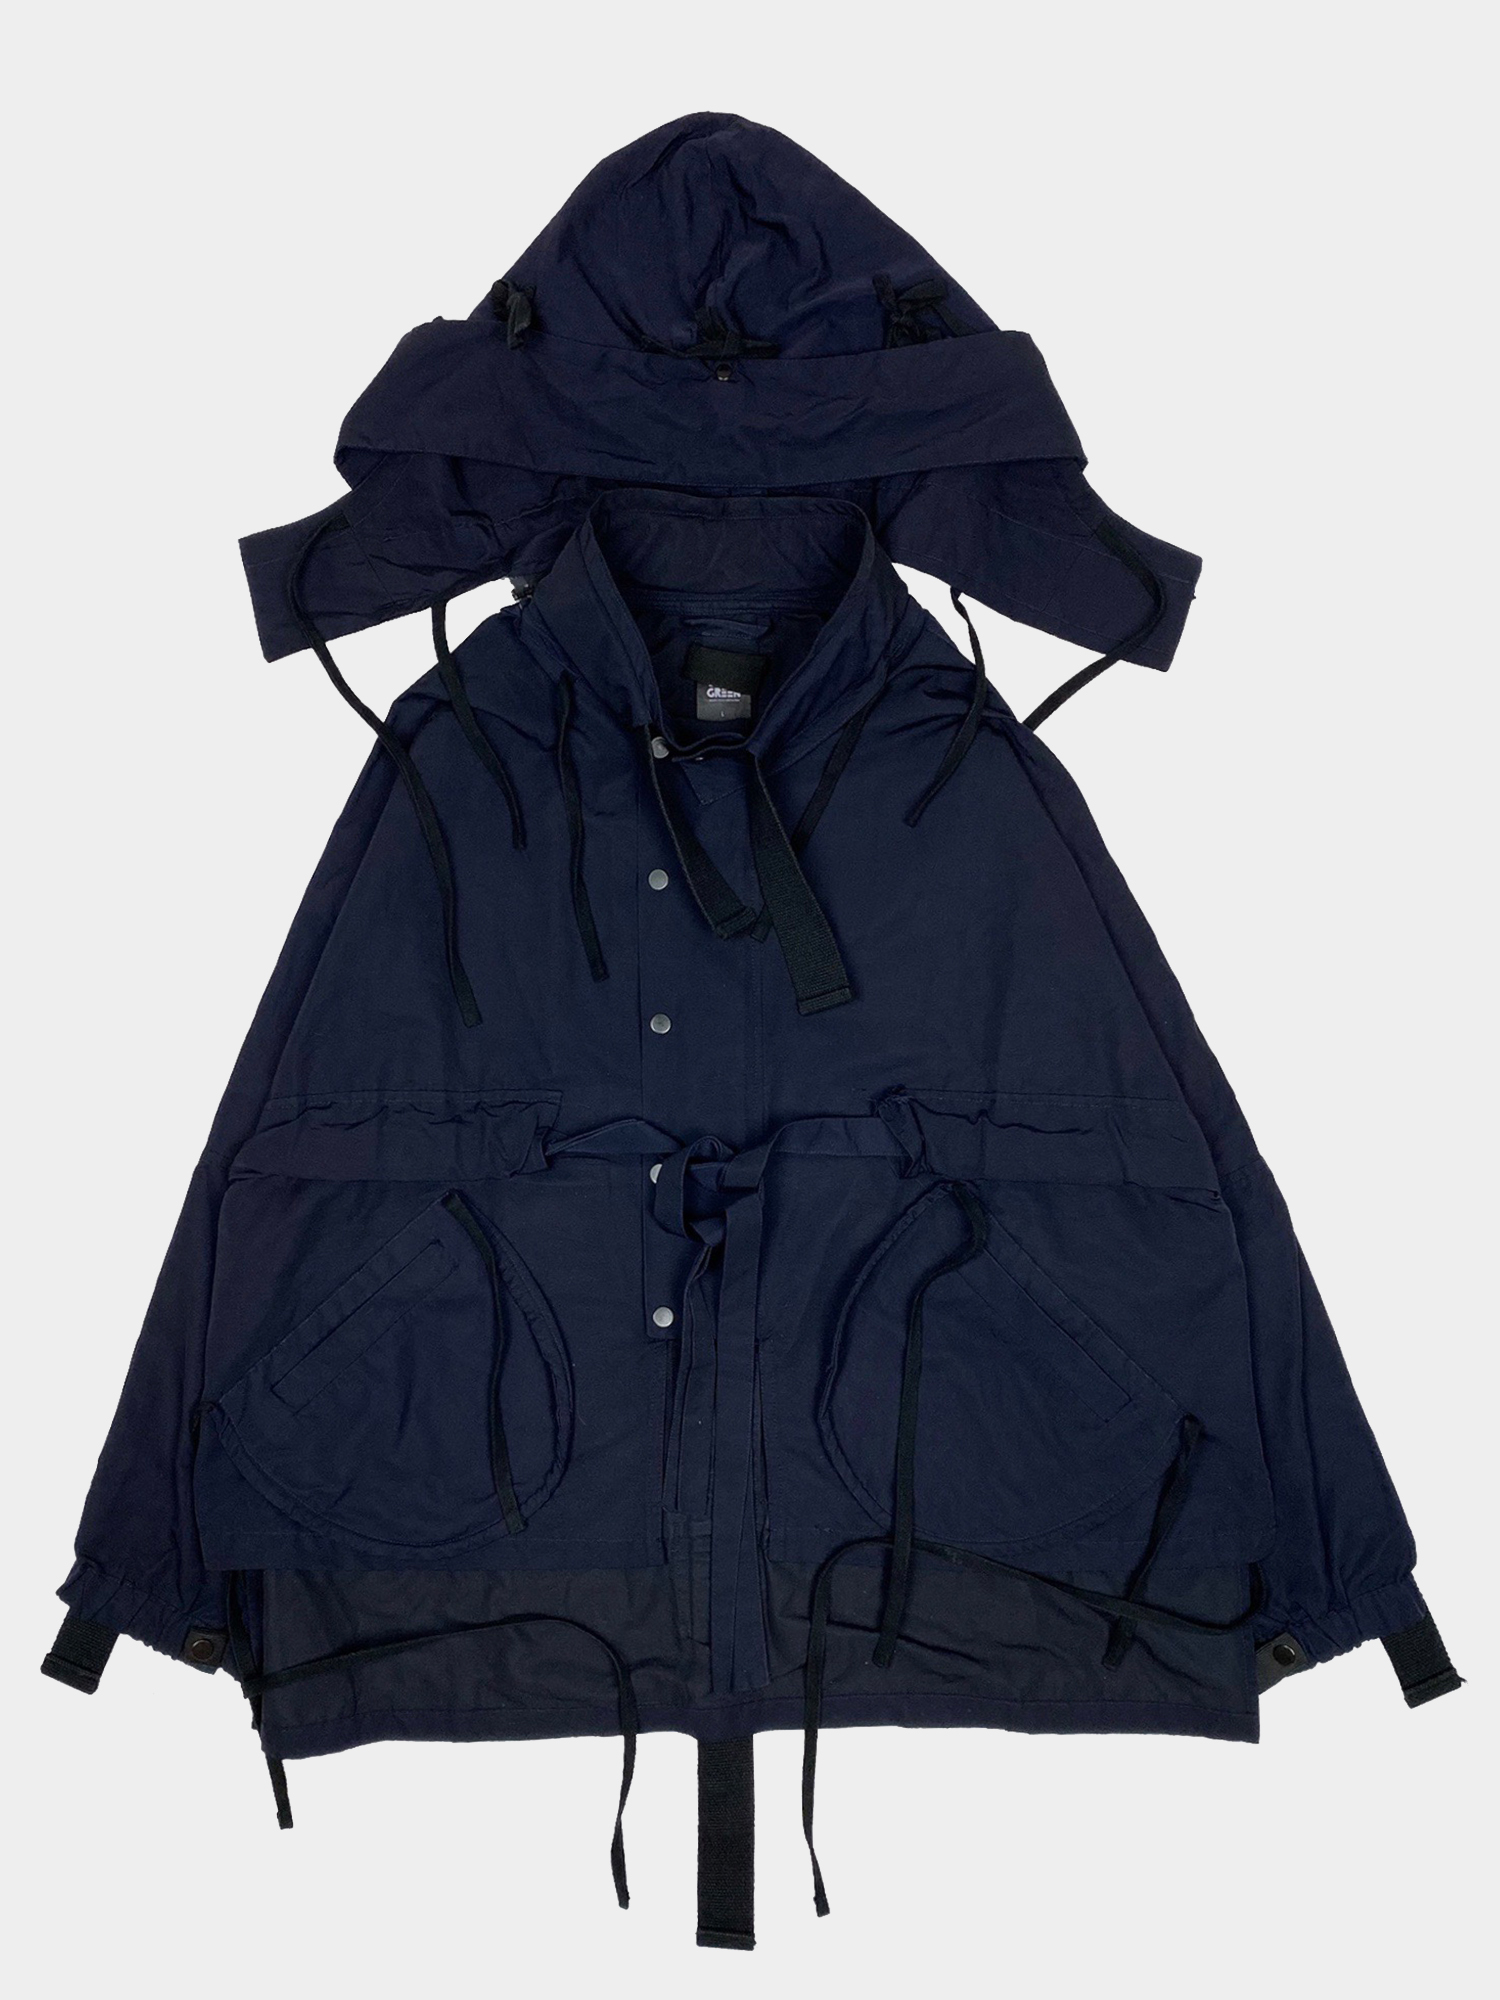 CRAIG GREEN A/W15 Parachute Jacket - ARCHIVED